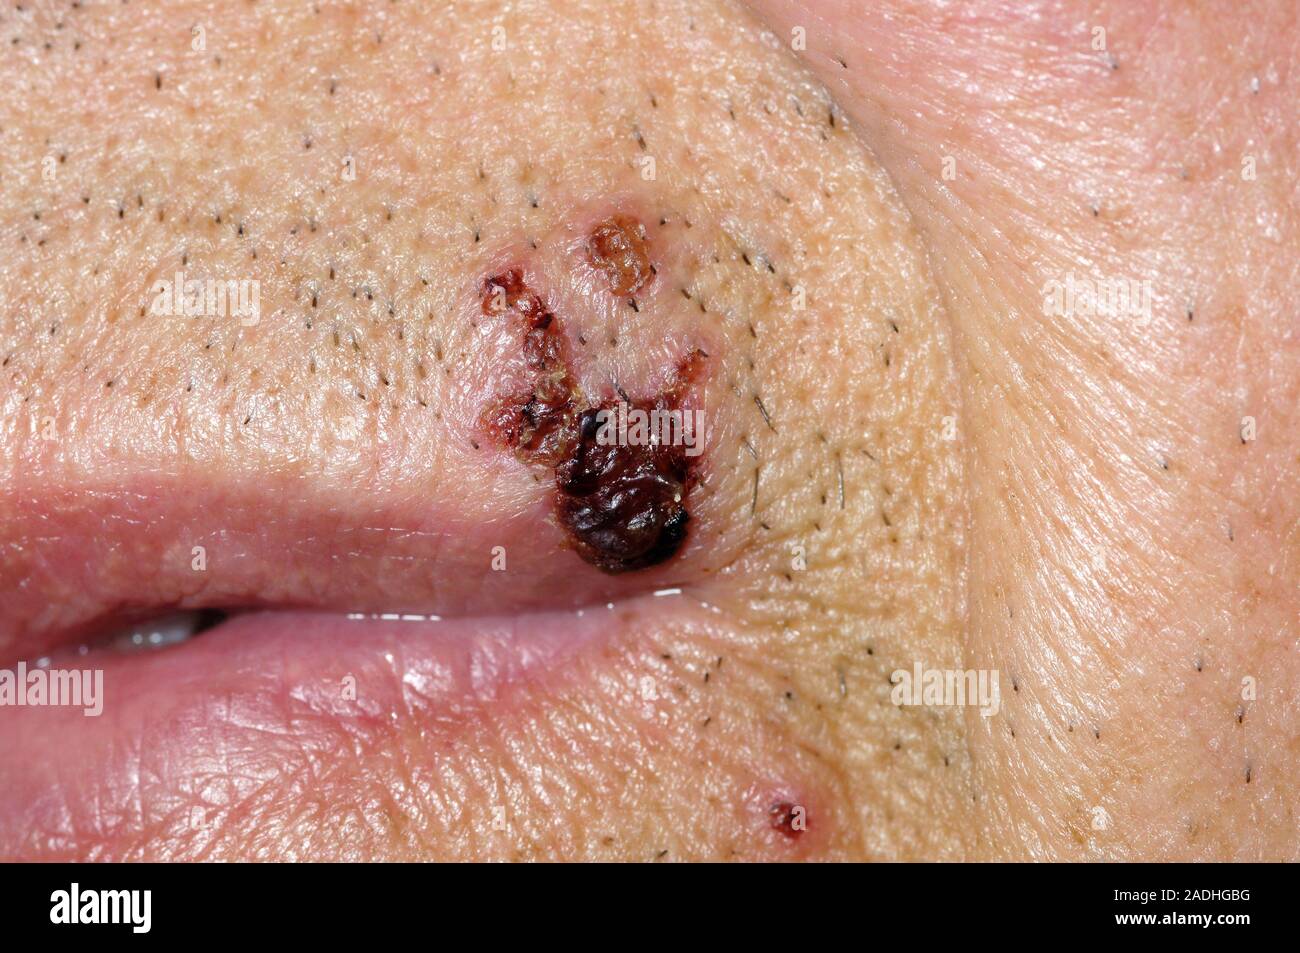 Cold Sores Around The Mouth Of An 80 Year Old Man Cold Sores Are